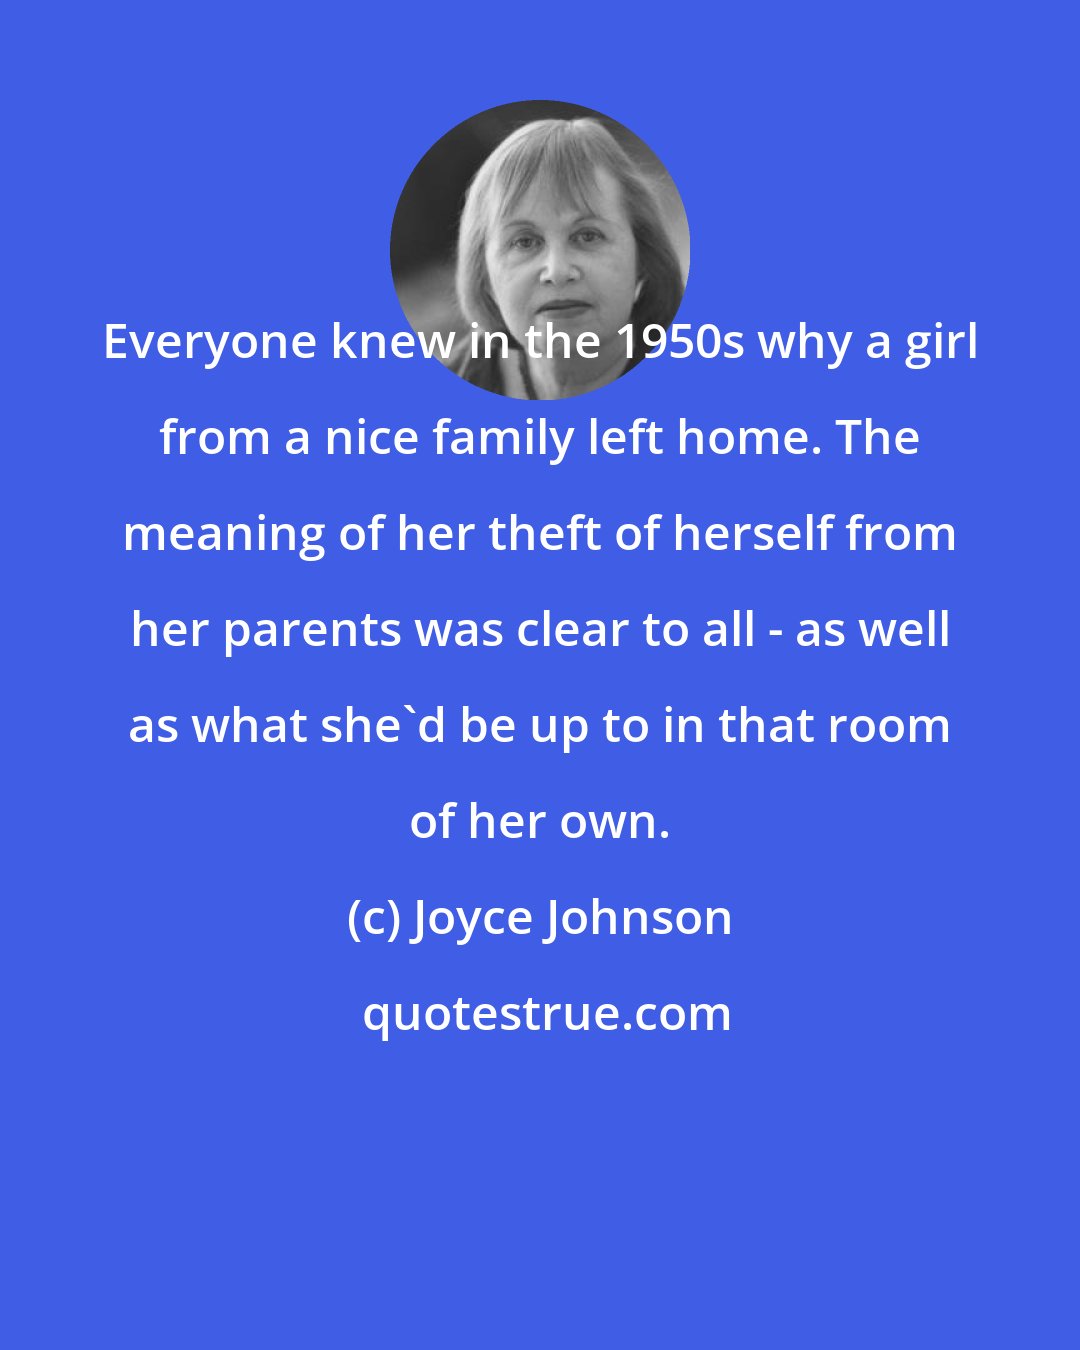 Joyce Johnson: Everyone knew in the 1950s why a girl from a nice family left home. The meaning of her theft of herself from her parents was clear to all - as well as what she'd be up to in that room of her own.